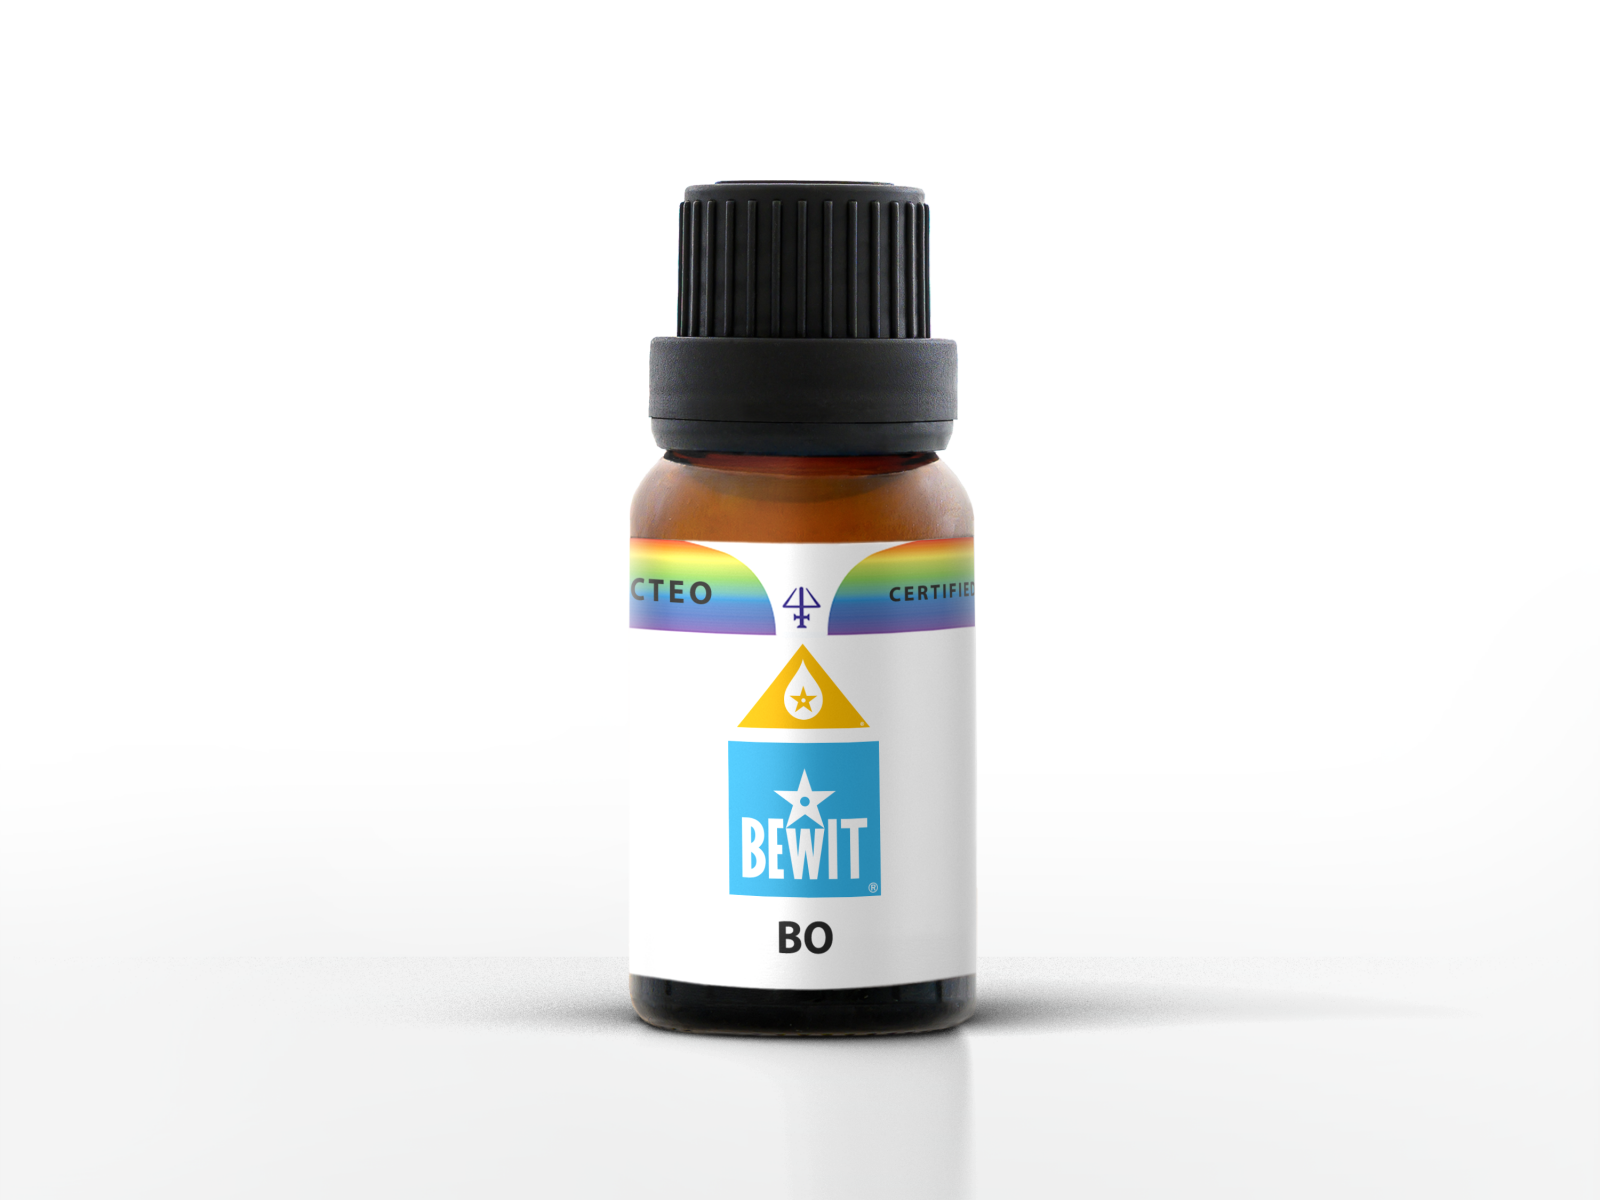 BEWIT BO - Blend of essential oils - 1